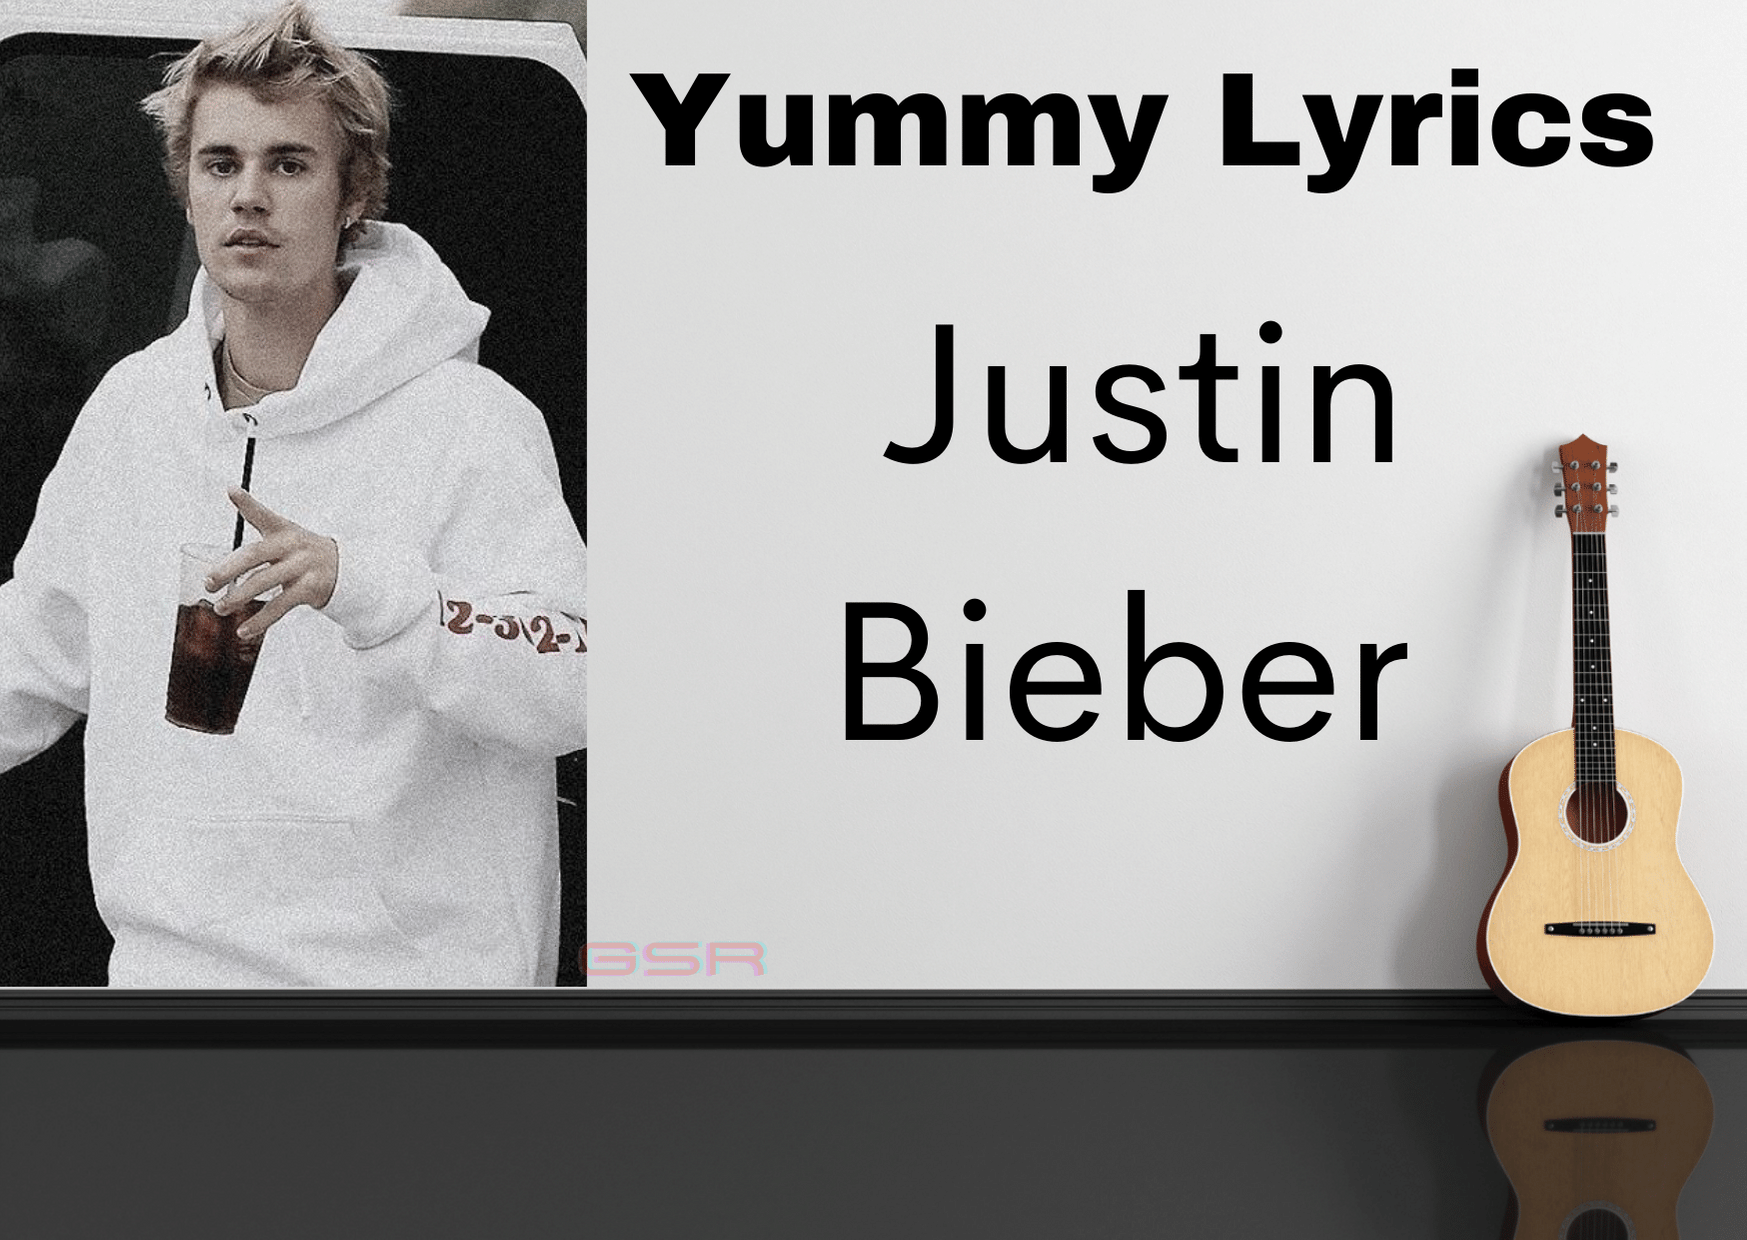 Justin Bieber Yummy Lyrics Yummy Lyrics - Justin Bieber Production Company: OBB Pictures Directed by: Nick DeMoura Co-Directed by: Jordan Taylor Executive Producers: Justin Bieber, Scooter Braun, Allison Kaye, Michael D. Ratner, Scott Ratner, Miranda Sherman, Kfir Goldberg Choreography by: Sienna Lalau Editor: Jordan Taylor Justin Bieber has released his long-awaited single Yummy after more than four years away from the music scene. "Yummy" is a song by Canadian singer Justin Bieber. It was released on January 3, 2020, along with a lyric video through Def Jam Recordings, as the lead single from his fifth studio album, Changes. [su_youtube url="https://youtu.be/8EJ3zbKTWQ8" autoplay="yes"] [su_heading]Yummy[/su_heading] Yeah, you got that yummy-yum That yummy-yum, that yummy-yummy Yeah, you got that yummy-yumThat yummy-yum, that yummy-yummy Say the word, on my way Yeah babe, yeah babe, yeah babe Any night, any day Say the word, on my way Yeah babe, yeah babe, yeah babe In the mornin' or the late Say the word, on my wayBonafide stallion It ain't no stable, no, you stay on the run Ain't on the side, you're number one Yeah, every time I come around, you get it done (You get it done) Fifty-fifty, love the way you split it Hundred racks, help me spend it, babe Light a match, get litty, babe That jet set, watch the sunset kinda, yeah, yeah Rollin' eyes back in my head, make my toes curl, yeah, yeahYeah, you got that yummy-yum That yummy-yum, that yummy-yummy Yeah, you got that yummy-yum That yummy-yum, that yummy-yummy Say the word, on my way Yeah babe, yeah babe, yeah babe Any night, any day Say the word, on my way Yeah babe, yeah babe, yeah babe In the mornin' or the late Say the word, on my way Standin' up, keep me on the rise Lost control of myself, I'm compromised You're incriminating, no disguise (No disguise) And you ain't never runnin' low on suppliesFifty-fifty, love the way you split it Hundred racks, help me spend it, babe Light a match, get litty, babe That jet set, watch the sunset kinda, yeah, yeah Rollin' eyes back in my head, make my toes curl, yeah, yeahYeah, you got that yummy-yum That yummy-yum, that yummy-yummy (You stay flexin' on me) Yeah, you got that yummy-yum (Yeah, yeah) That yummy-yum, that yummy-yummy Say the word, on my way Yeah babe, yeah babe, yeah babe (Yeah, babe) Any night, any day Say the word, on my way Yeah babe, yeah babe, yeah babe (Yeah, babe) In the mornin' or the late Say the word, on my wayHop in the Lambo', I'm on my way Drew House slippers on with a smile on my face I'm elated that you are my lady You got the yum, yum, yum, yum You got the yum, yum-yum, woah Woah-oohYeah, you got that yummy-yum That yummy-yum, that yummy-yummy Yeah, you got that yummy-yum That yummy-yum, that yummy-yummy Say the word, on my way Yeah babe, yeah babe, yeah babe (Yeah, babe) Any night, any day Say the word, on my way Yeah babe, yeah babe, yeah babe (Yeah, babe) In the mornin' or the late Say the word, on my way